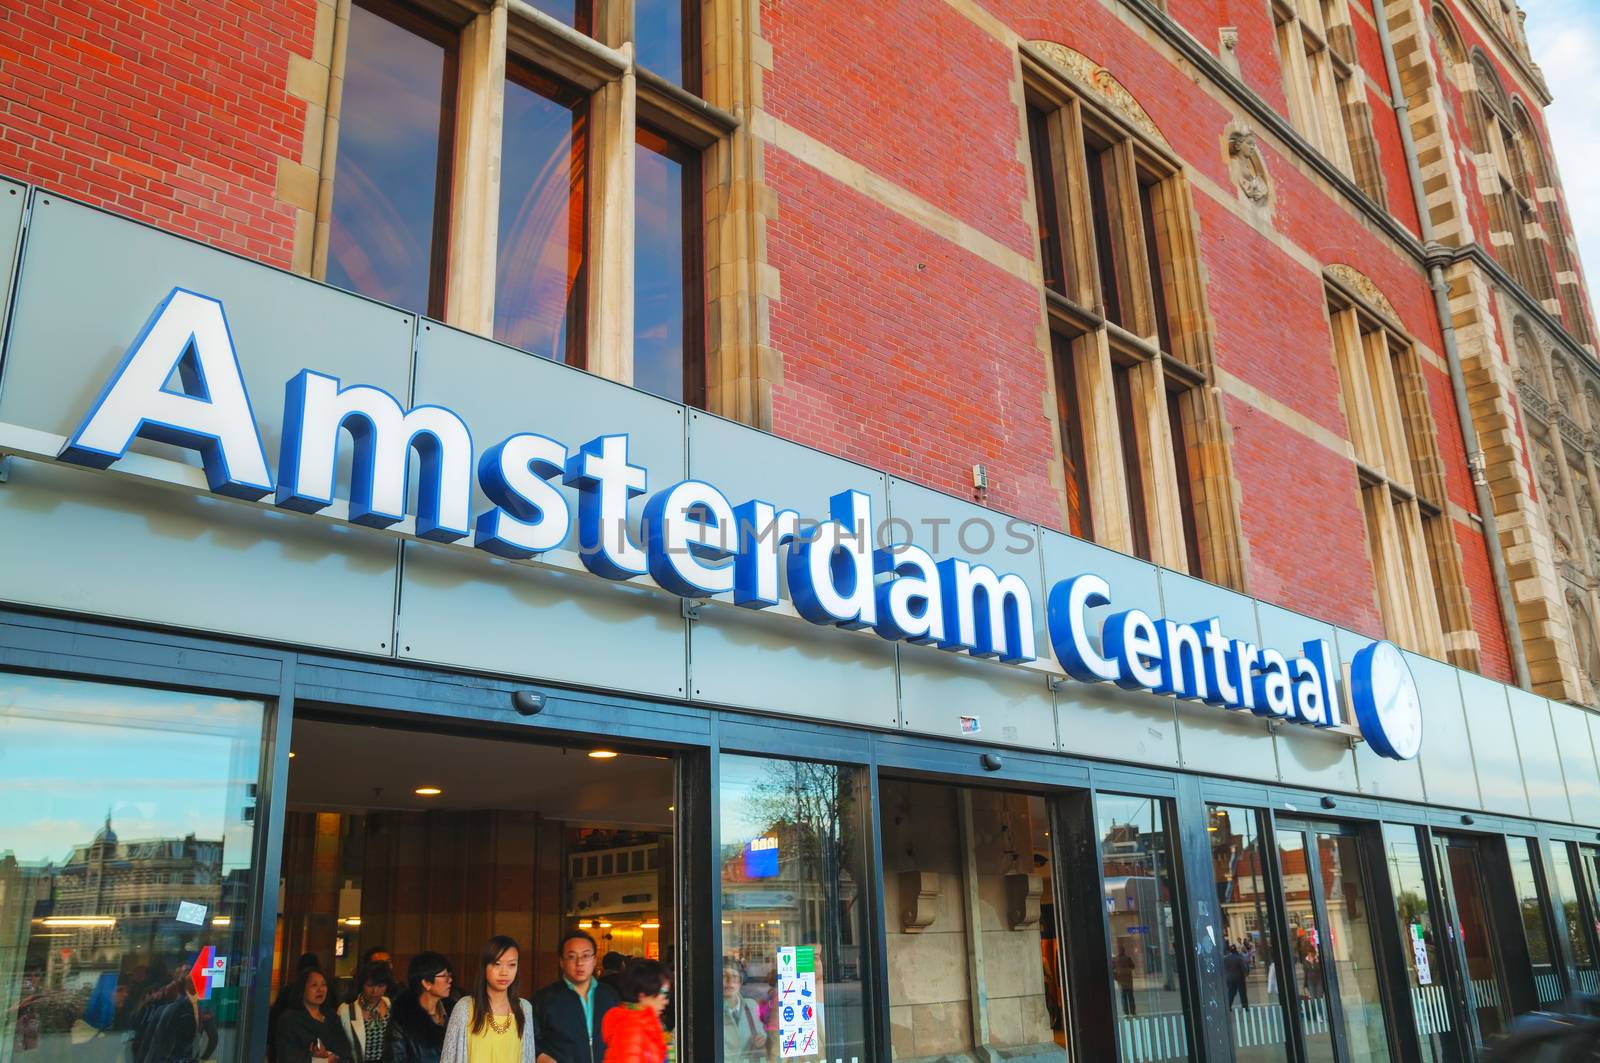 AMSTERDAM - APRIL 16: Entrance to the Amsterdam Centraal railway station on April 16, 2015 in Amsterdam, Netherlands. It's is the largest railway station of Amsterdam and a major national railway hub.